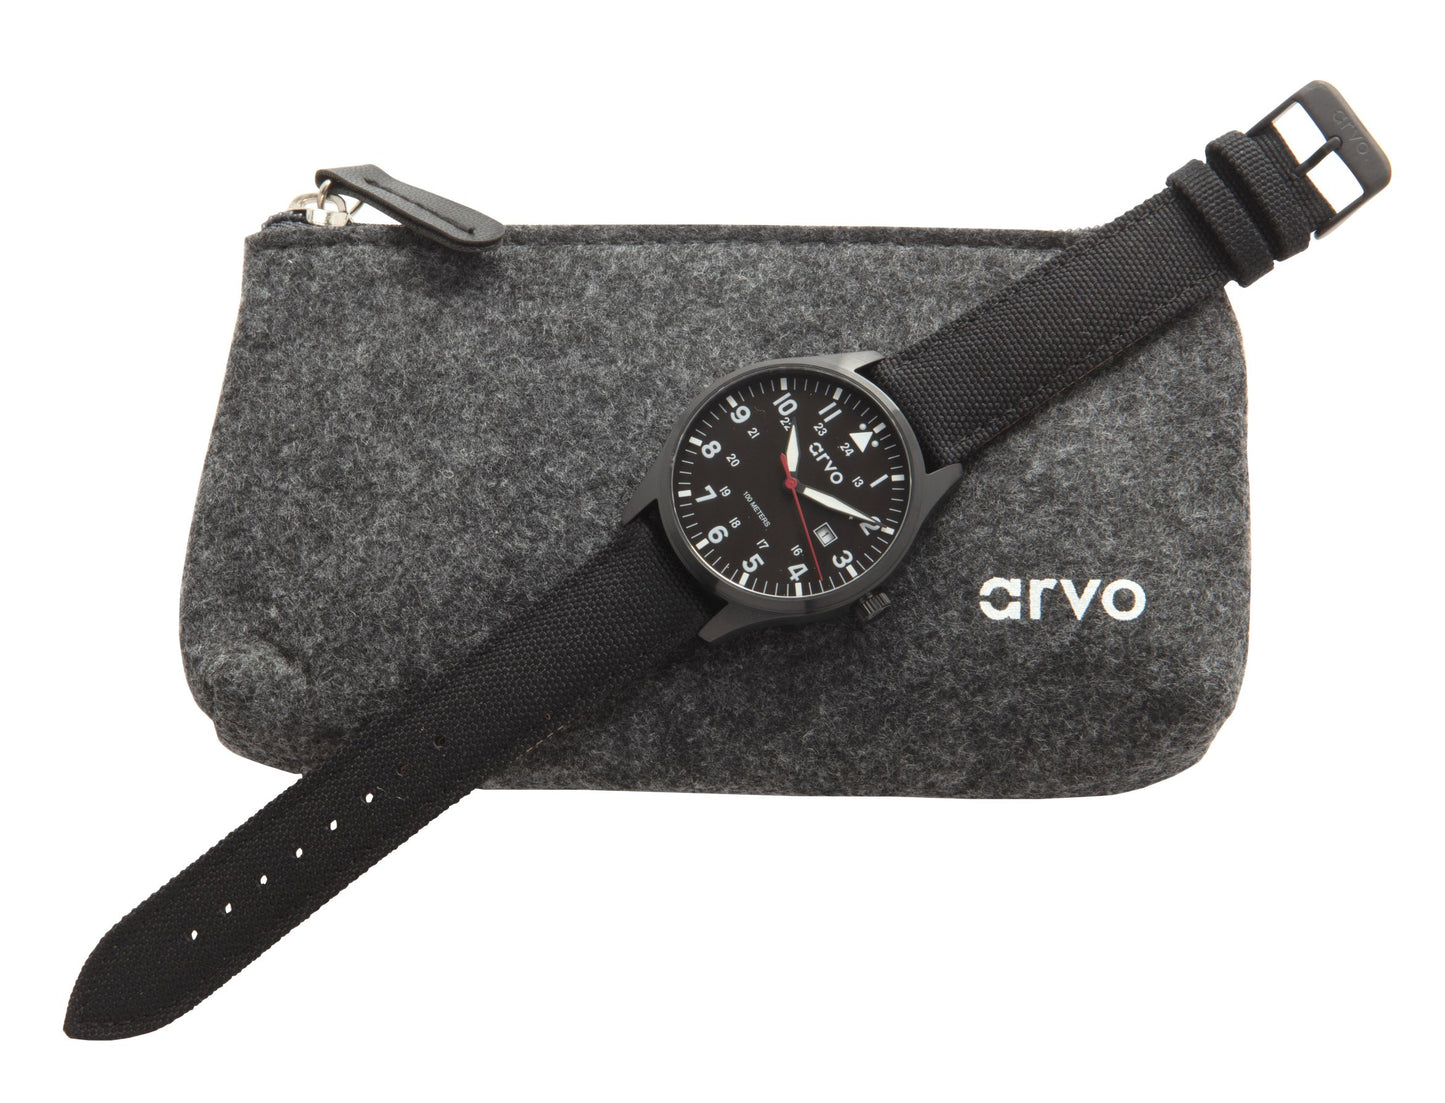 Arvo Rove Field Watch for men with a sky black dial and black canvas strap laying on a gray felt Arvo storage pouch